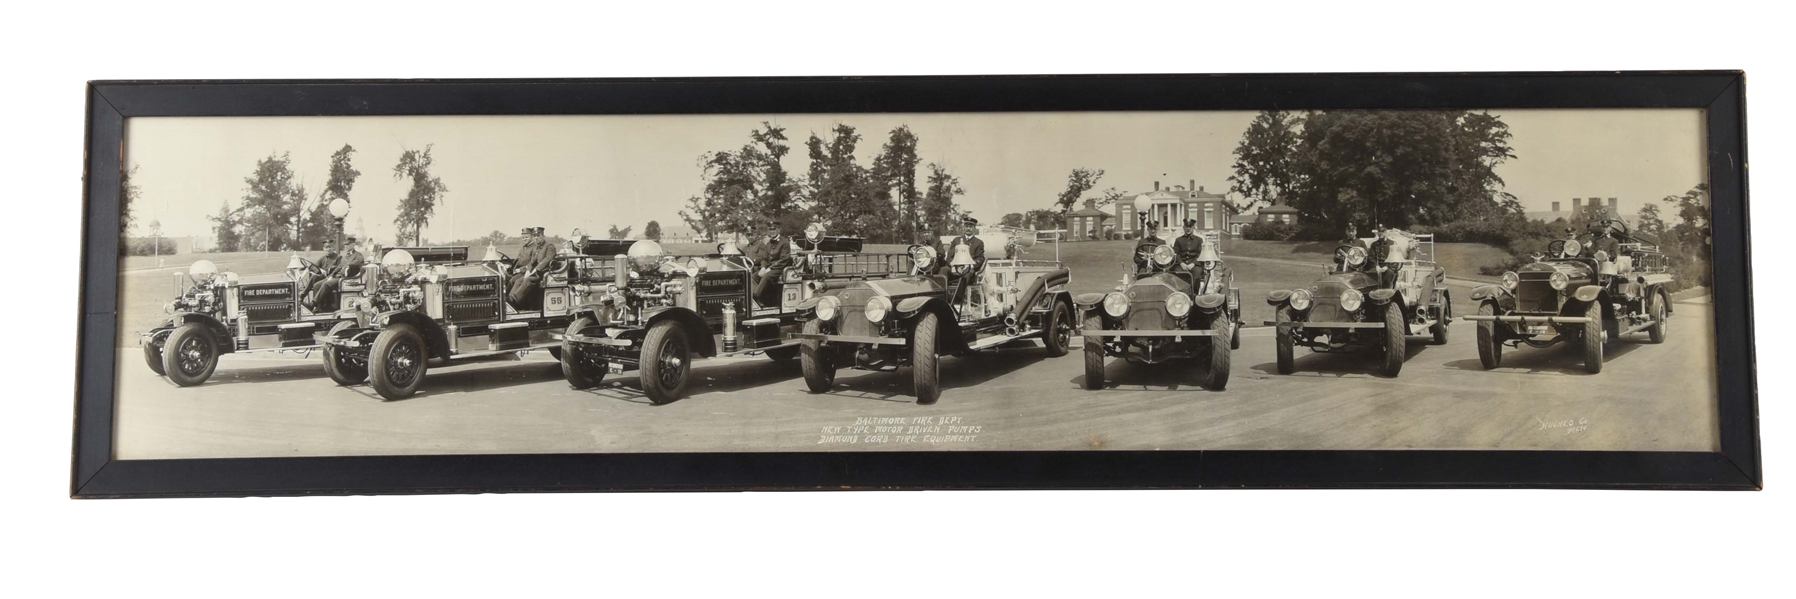 LOT OF 2: BALTIMORE FIRE DEPARTMENT & 1915 CHEVROLET CARS FRAMED YARD LONG PHOTOGRAPHS.